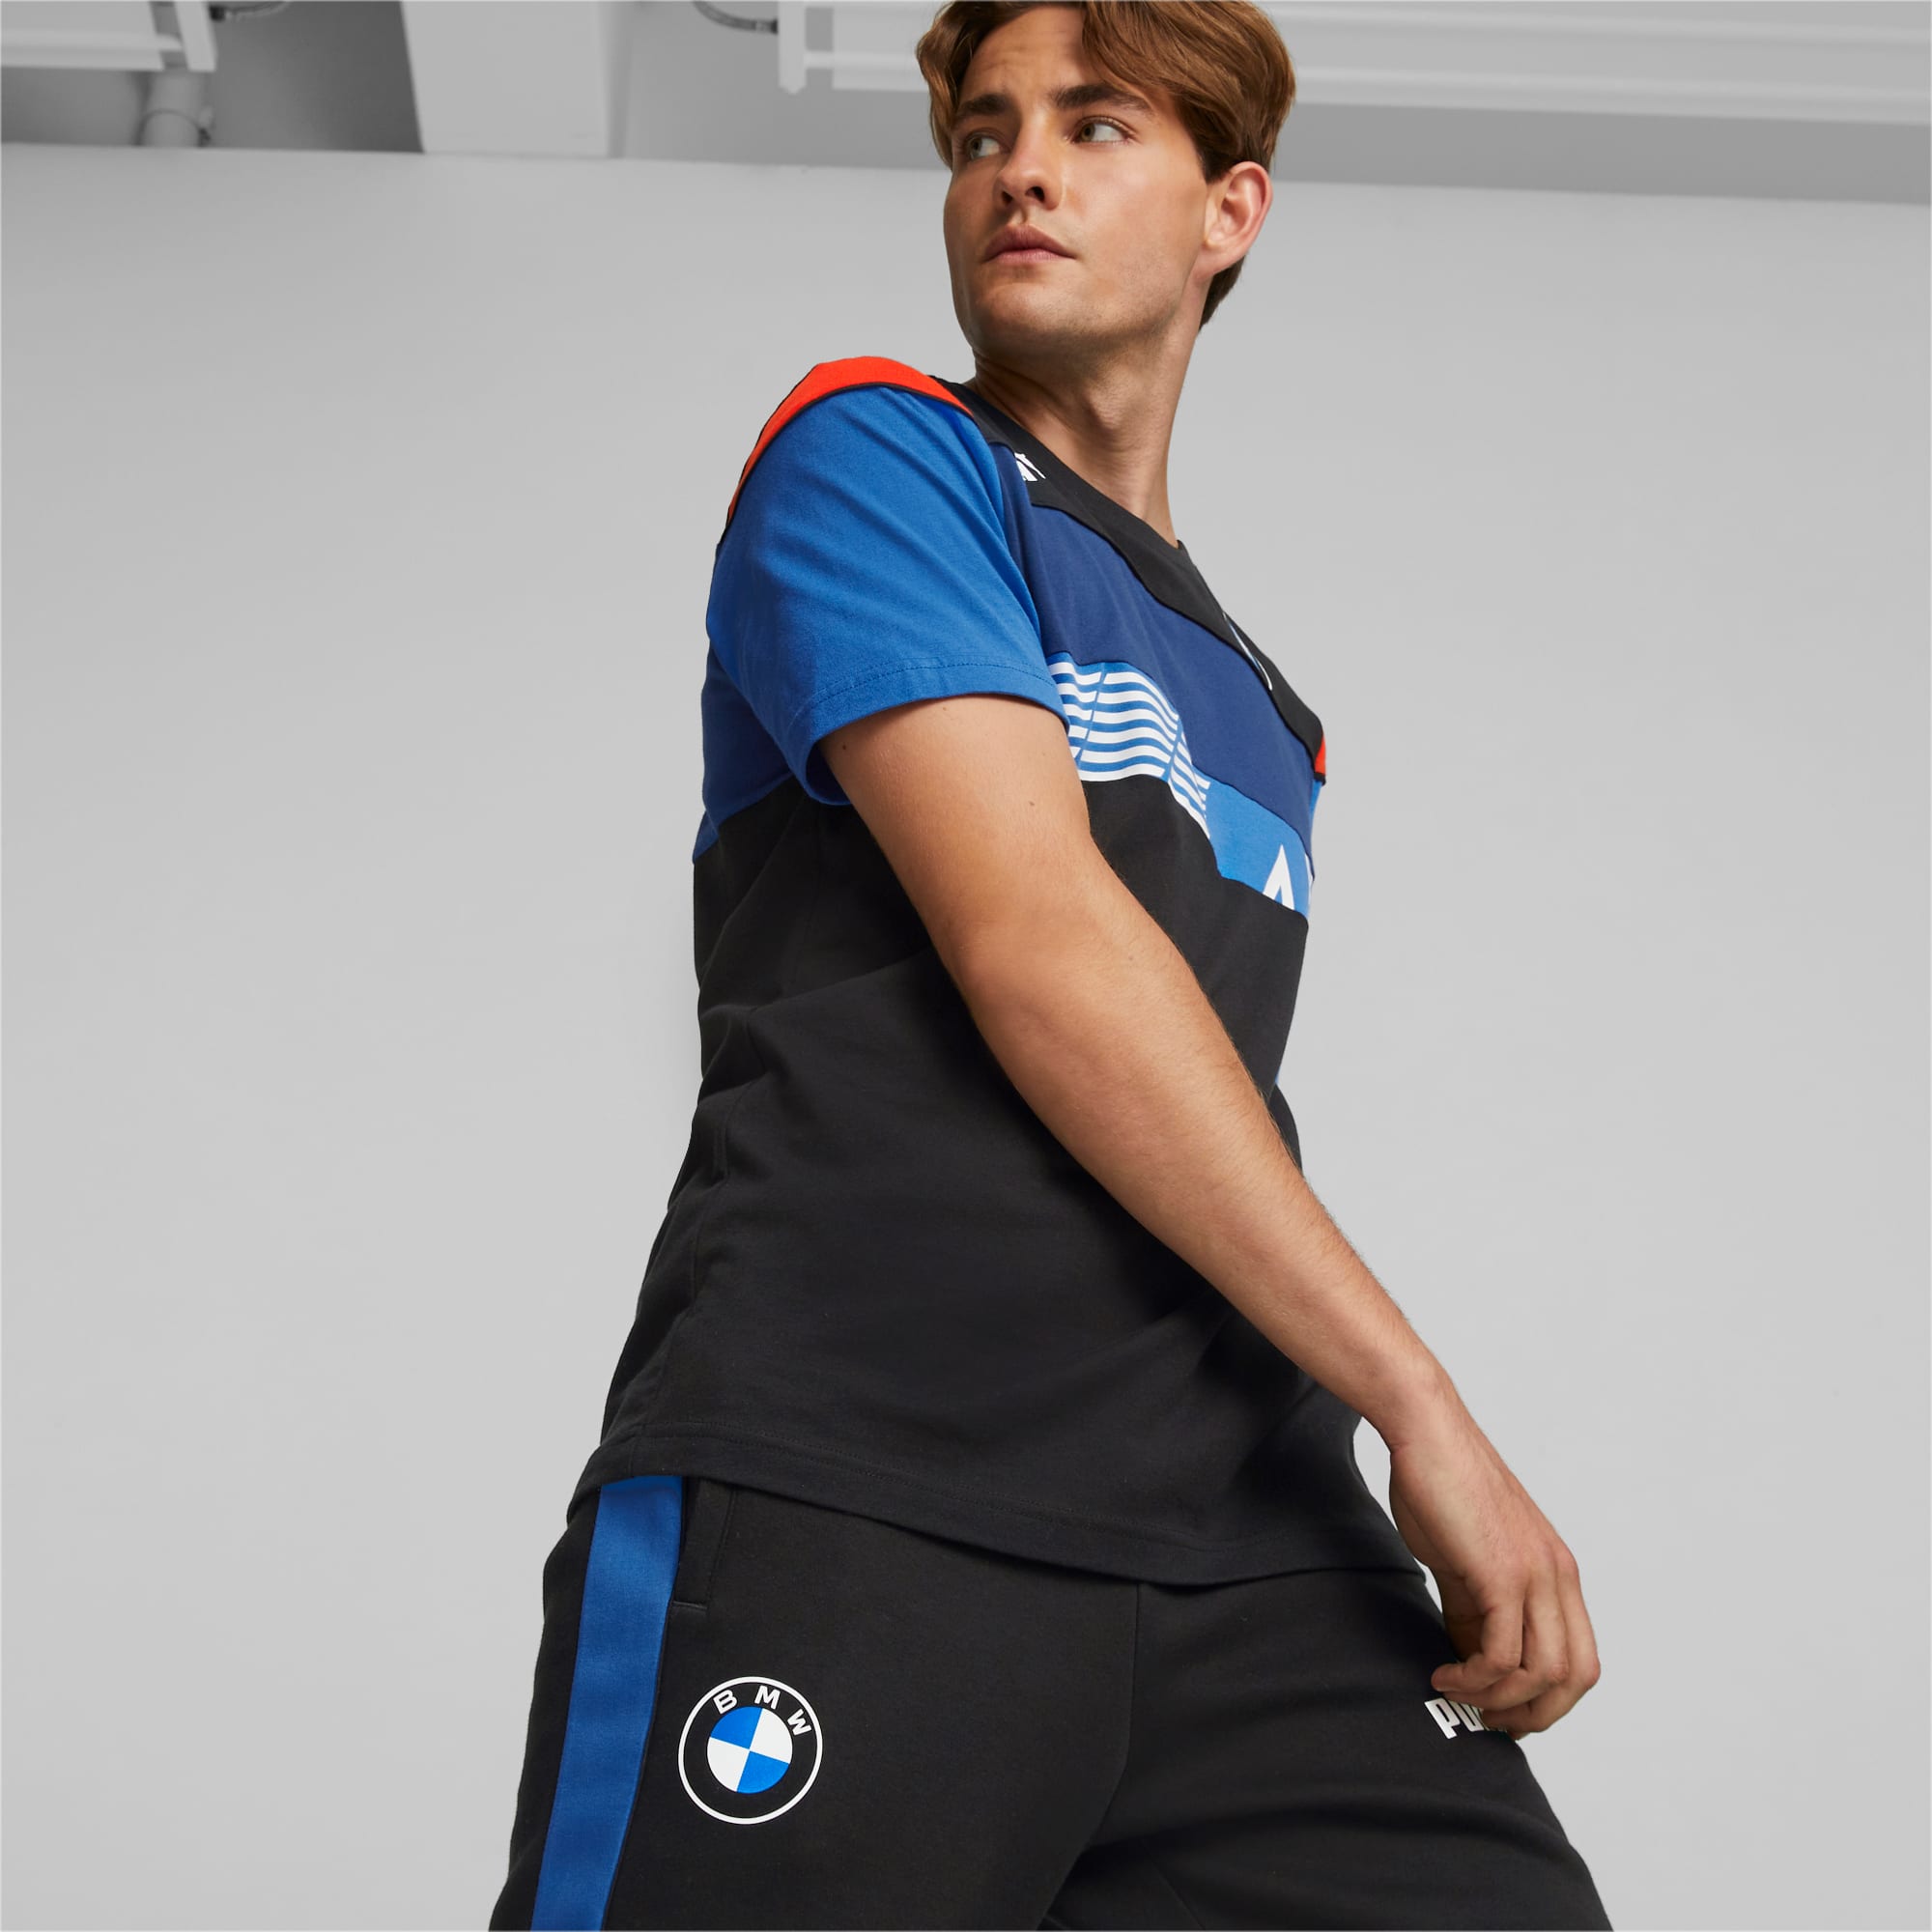 T SHIRT HOMME TAILLE S BMW MOTORSPORT